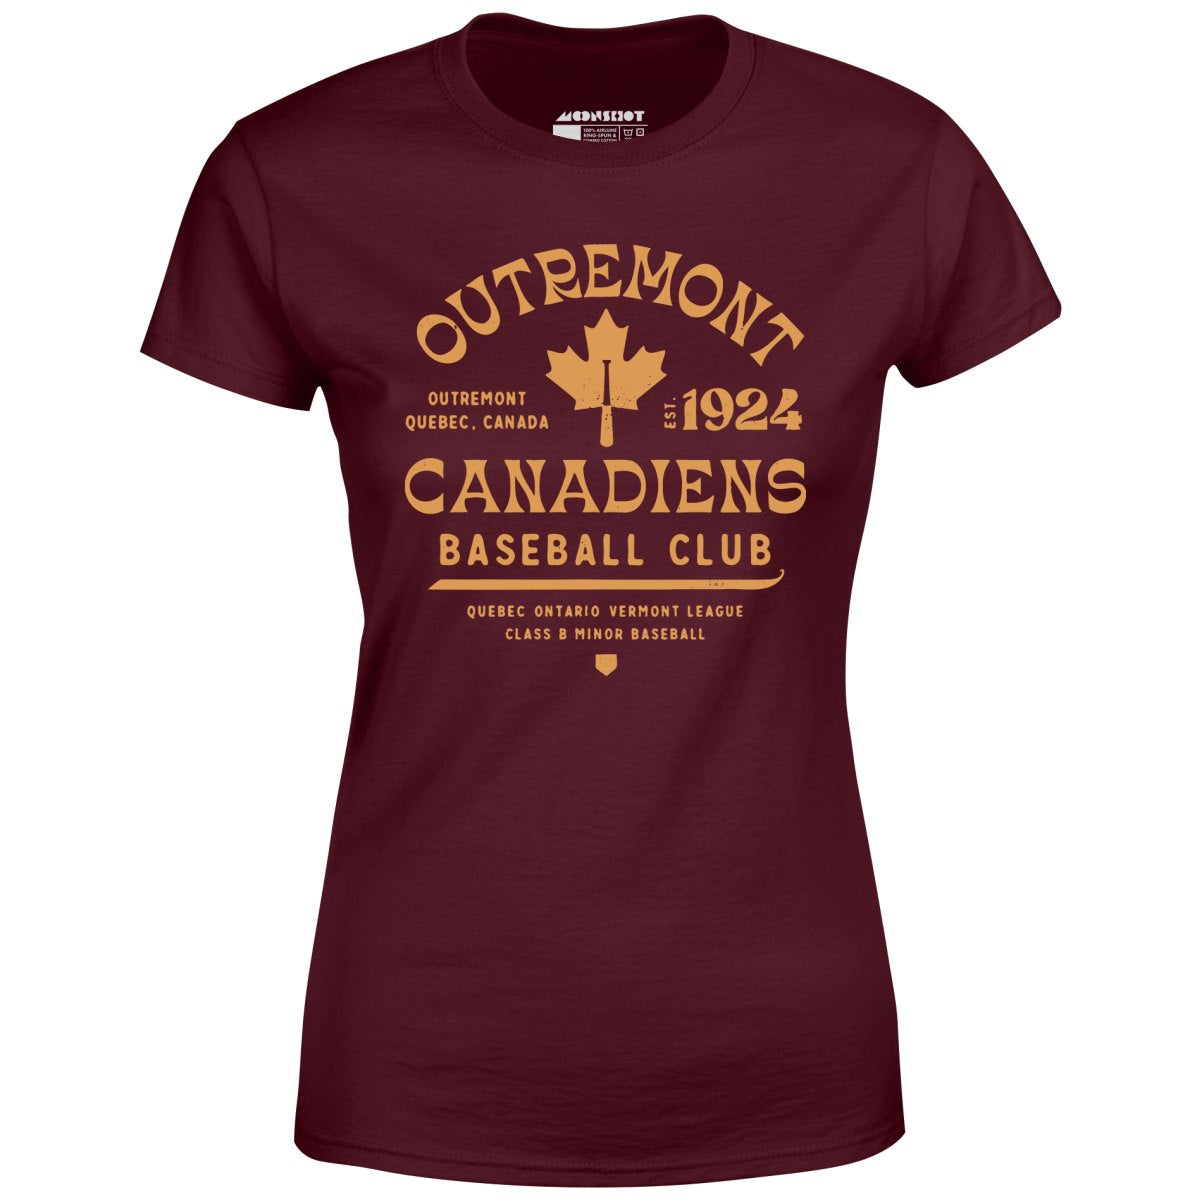 Outremont Canadiens - Canada - Vintage Defunct Baseball Teams - Women's T-Shirt